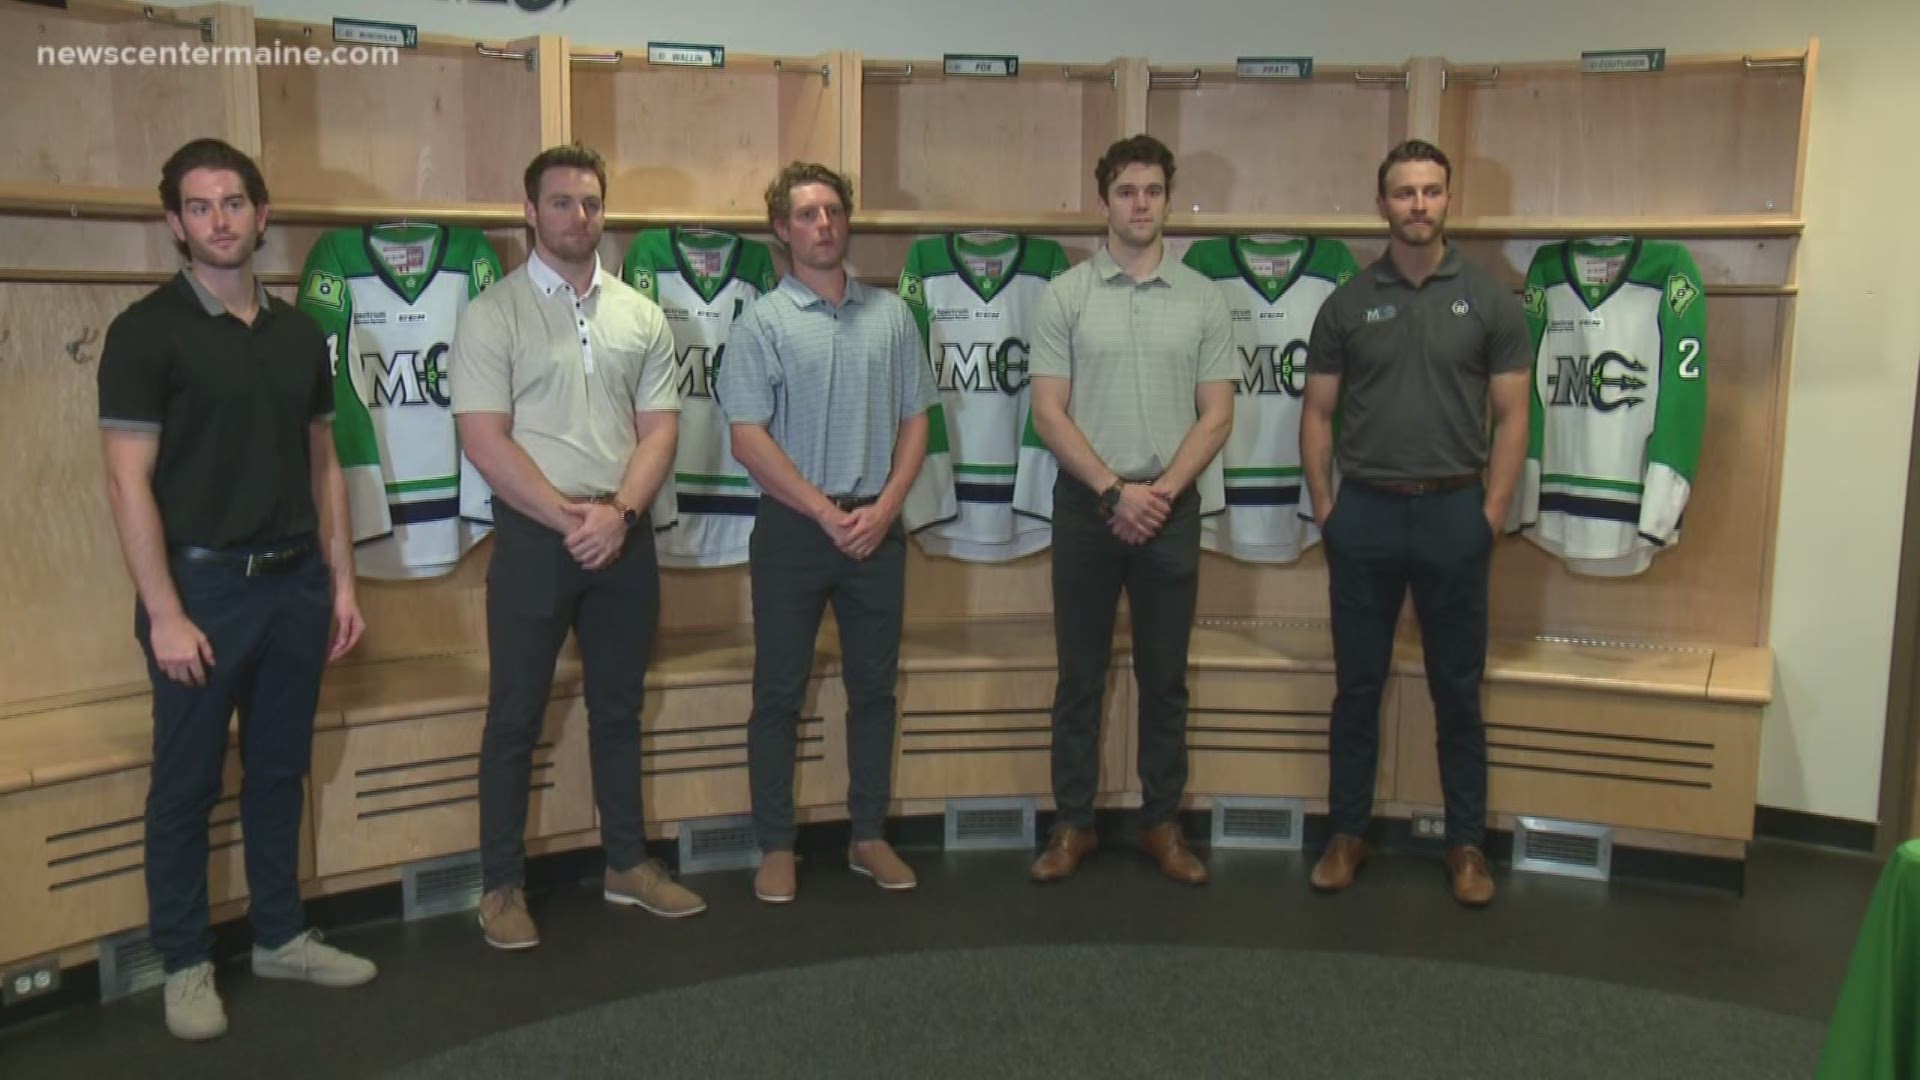 The Maine Mariners are already gearing up for their 2020 season. They have resigned five players who have made Portland their home for the summer to train and take in what the city has to offer.